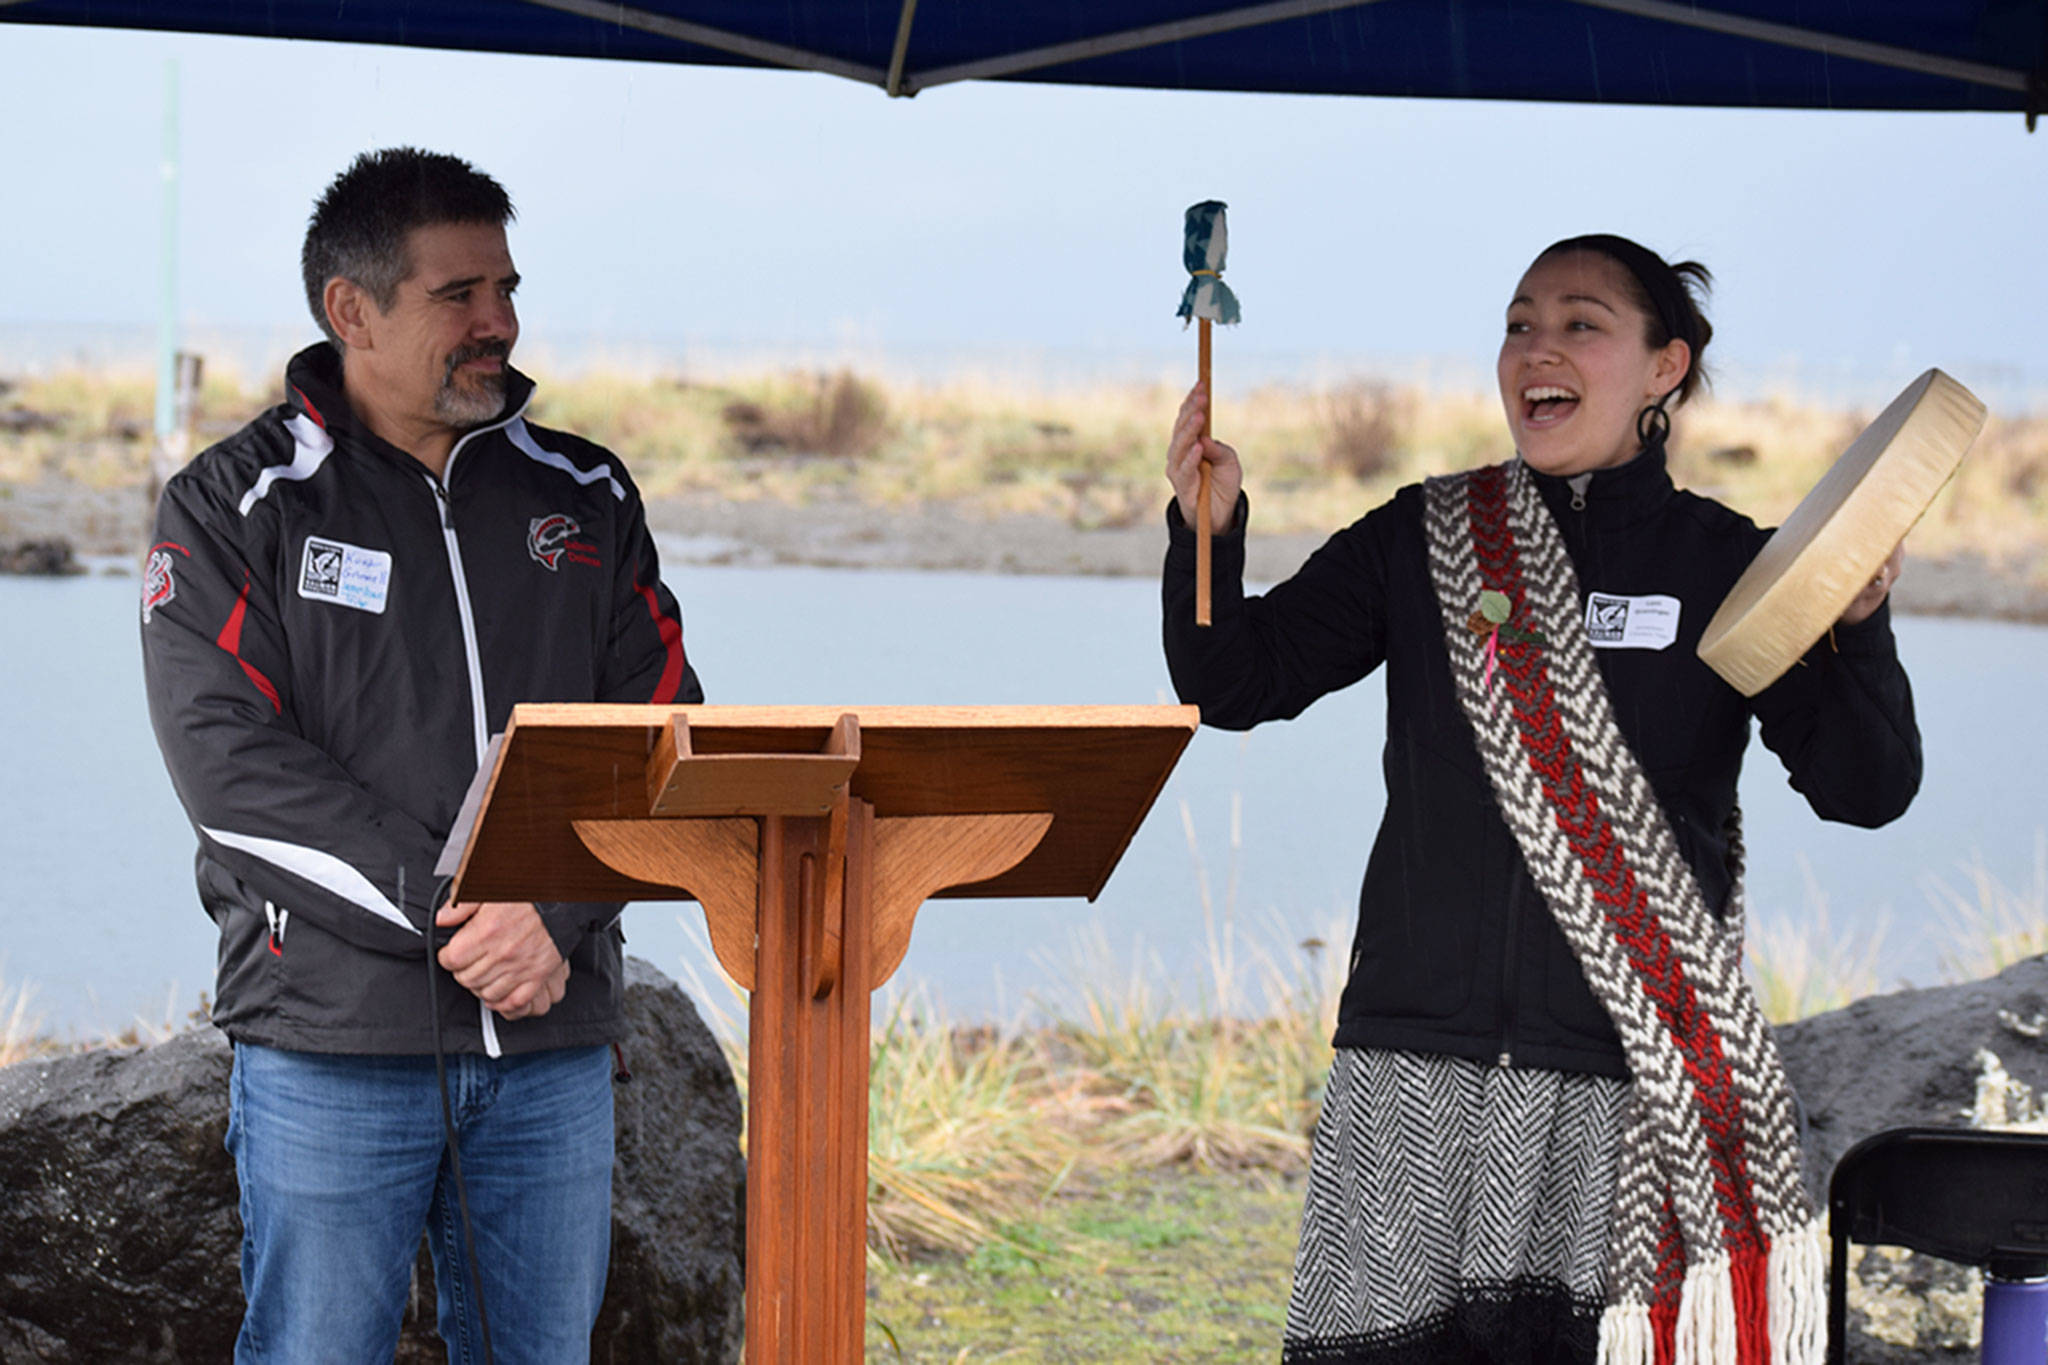 Jamestown S’Klallam Tribe citizens Kurt Grinnell and his daughter Loni Grinnell-Greninger in December 2018 open the North Olympic Salmon Coalition ribbon cutting ceremony at the 3 Crabs Nearshore and Estuarine Restoration Project with a special welcome. Kurt Grinnell died April 20 in a single-vehicle accident. Sequim Gazette file photo by Erin Hawkins